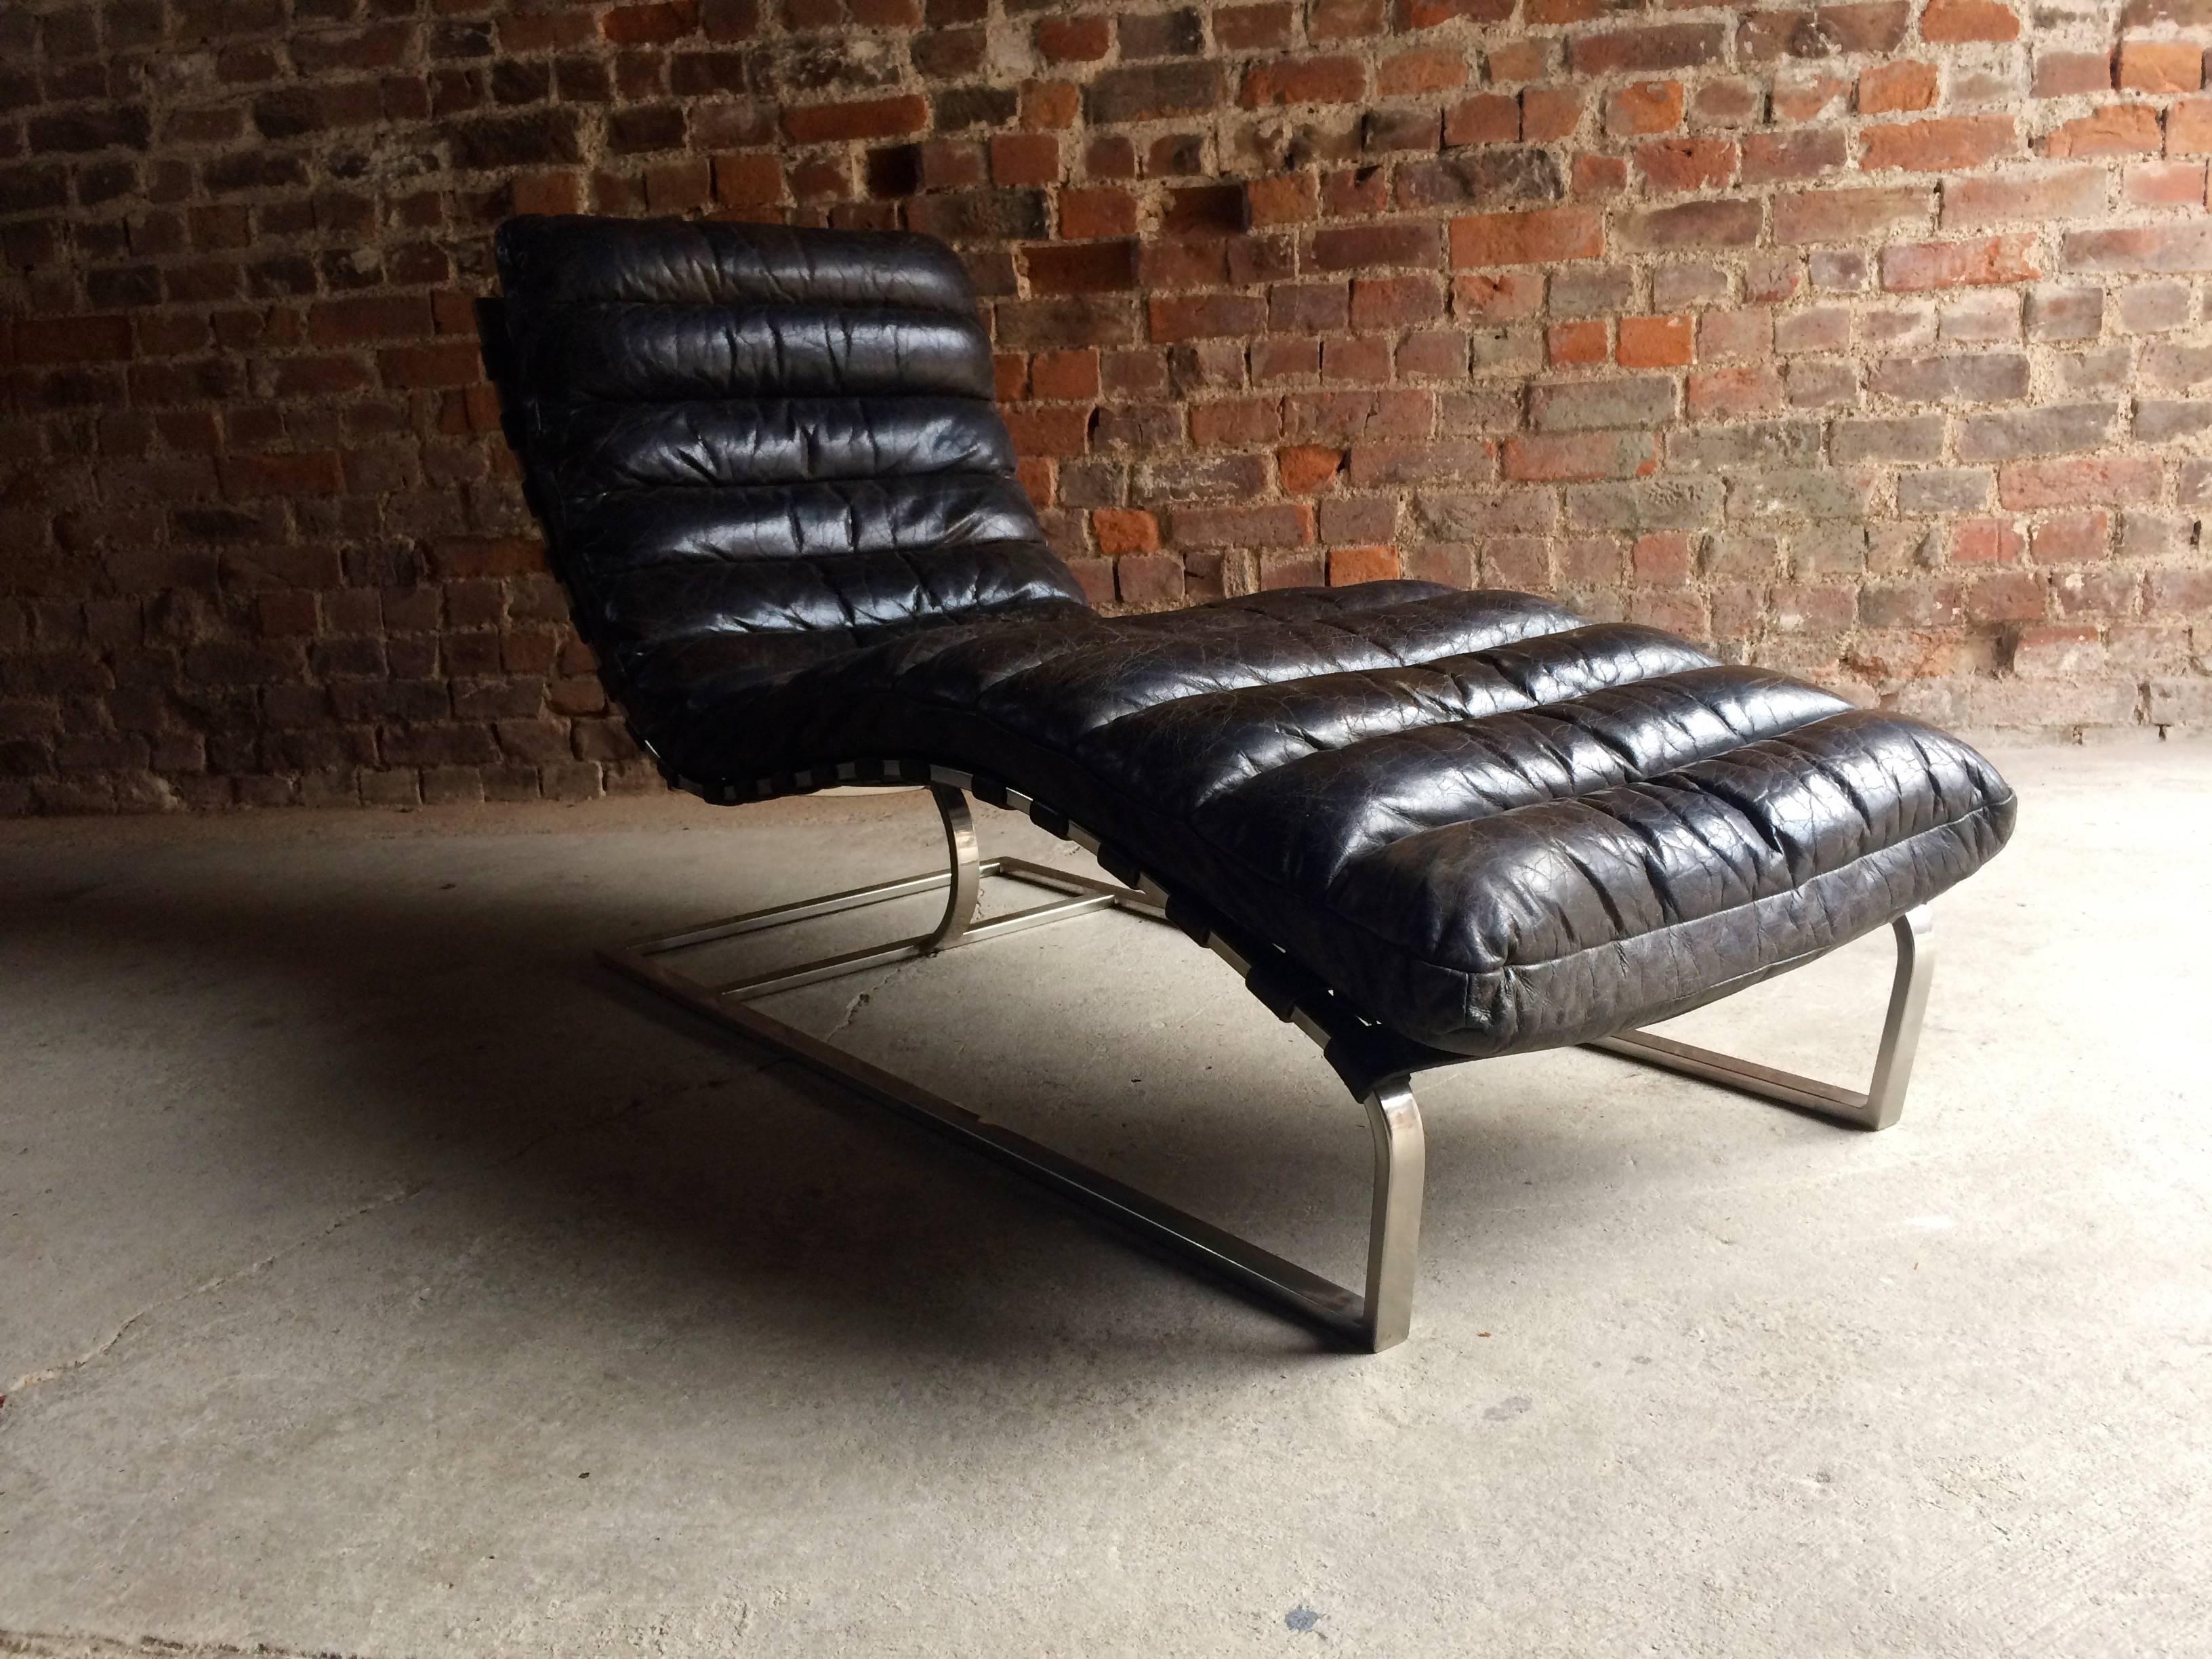 A stunningly beautiful vintage Mid Century contemporary leather Italian chromed steel chaise lounge day-bed. The Chaise having thick black one-pice channel-stitched leather wrapped cushion and standing on cantilevered base crafted of sleek